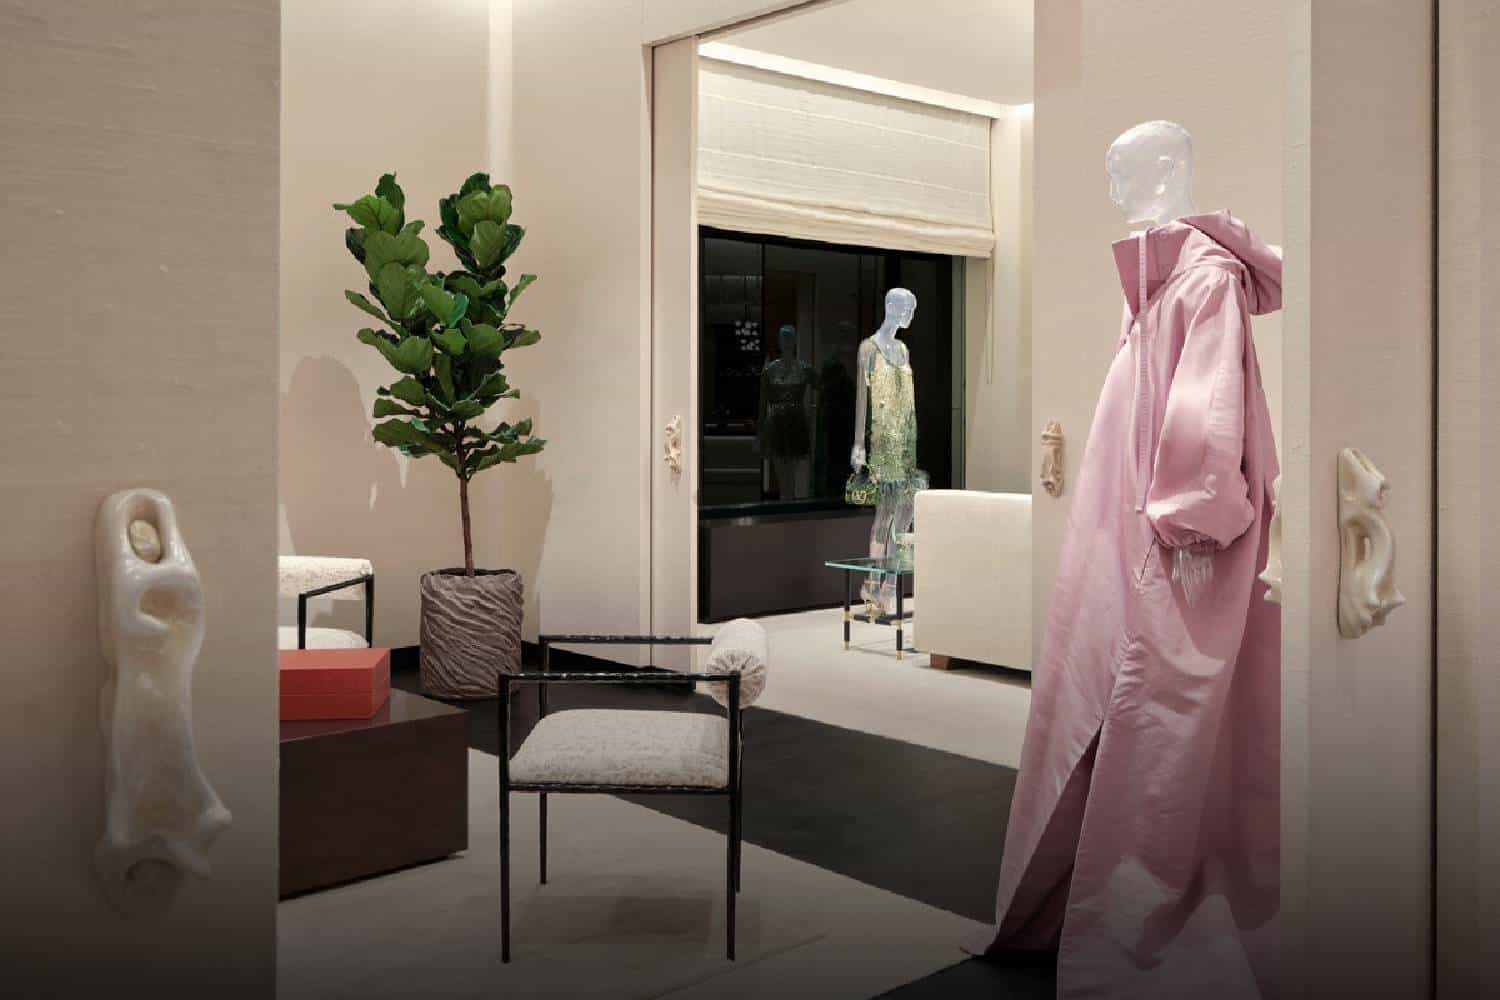 maison Valentino flagship store Madison Avenue women ready-to-wear collection